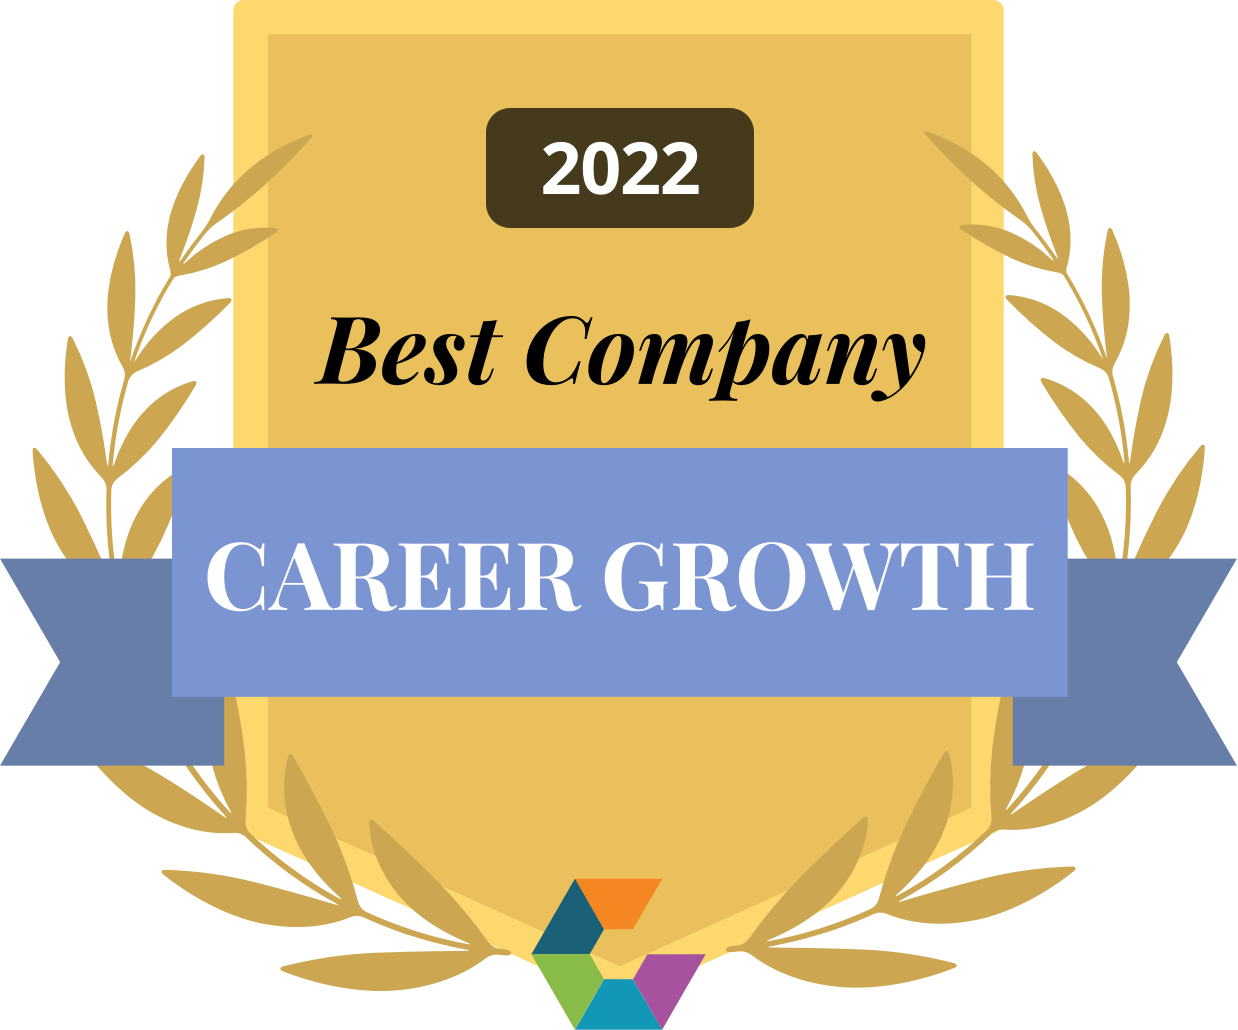 Comparably_Best Career Growth_2022